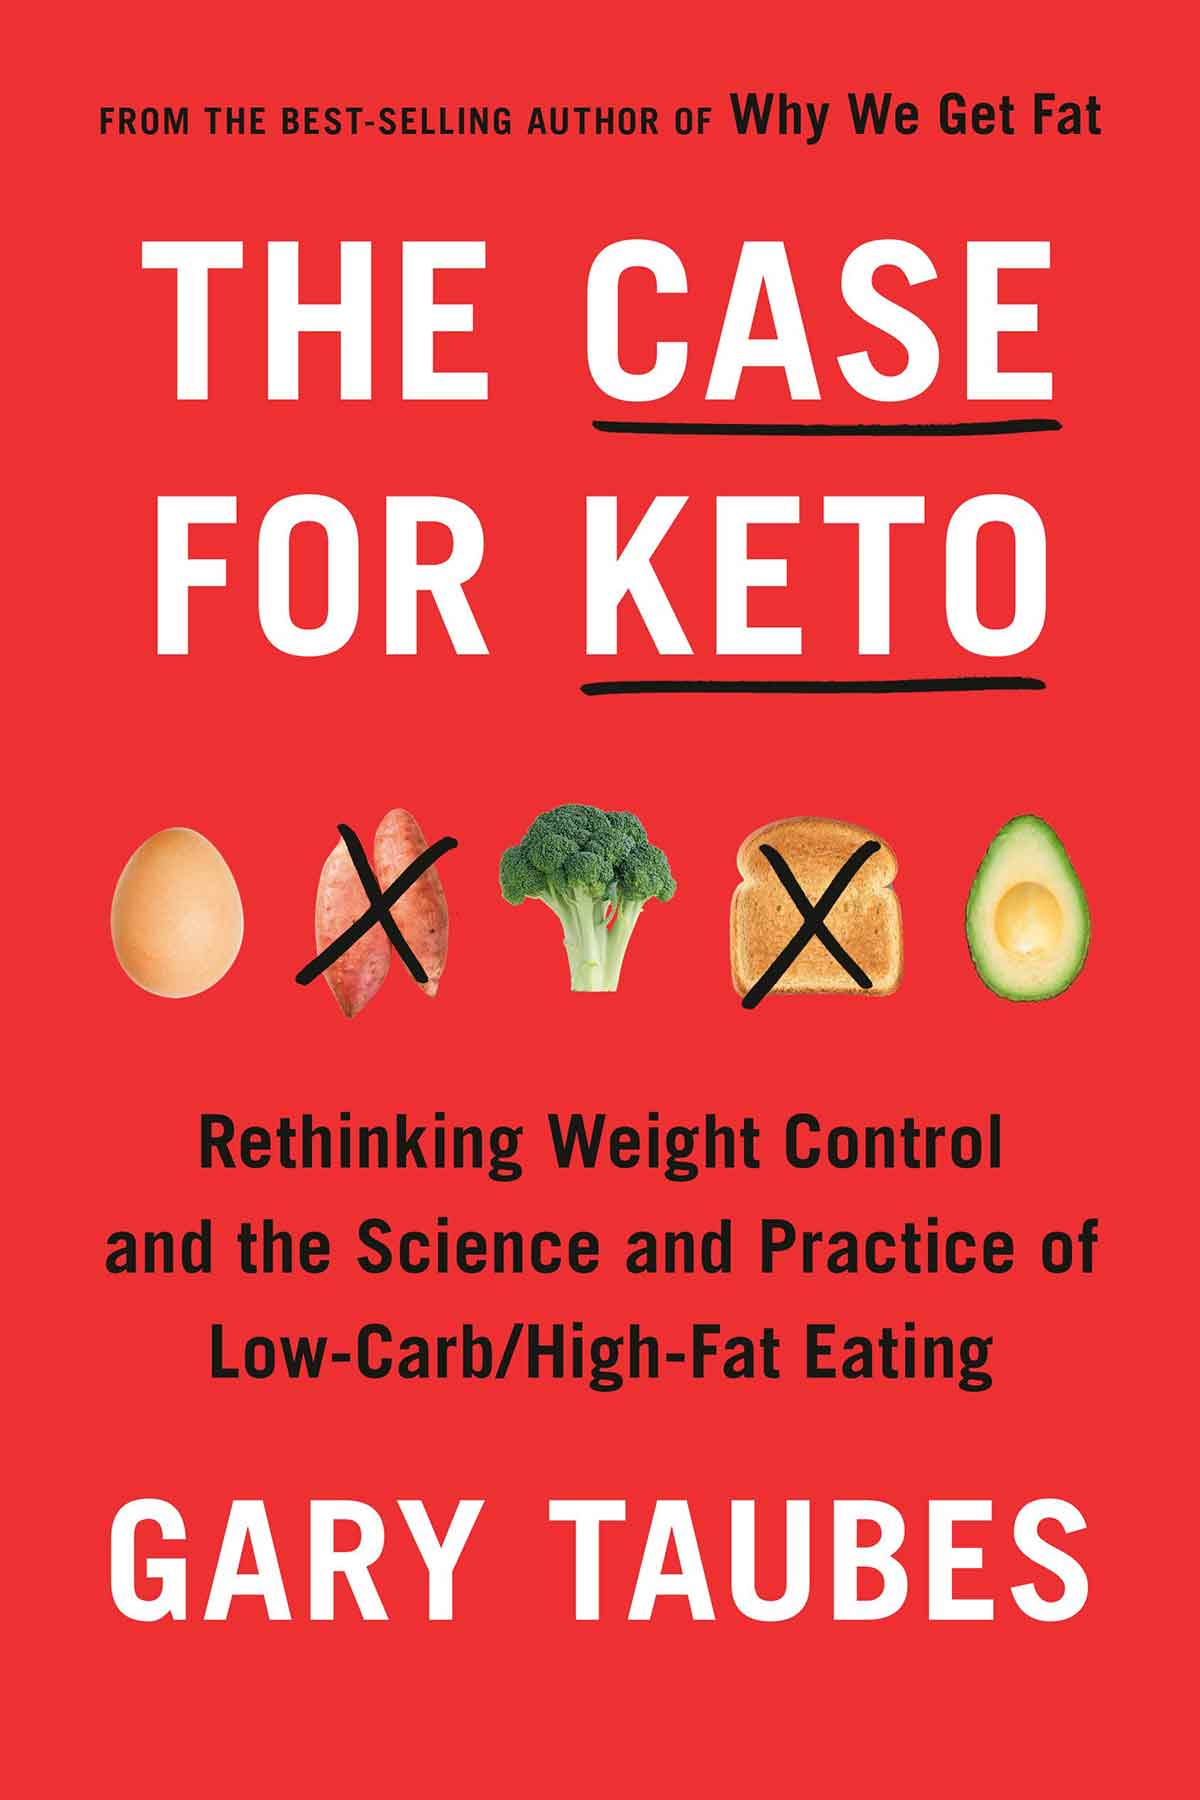 The cover of The Case for Keto, by Gary Taubes.